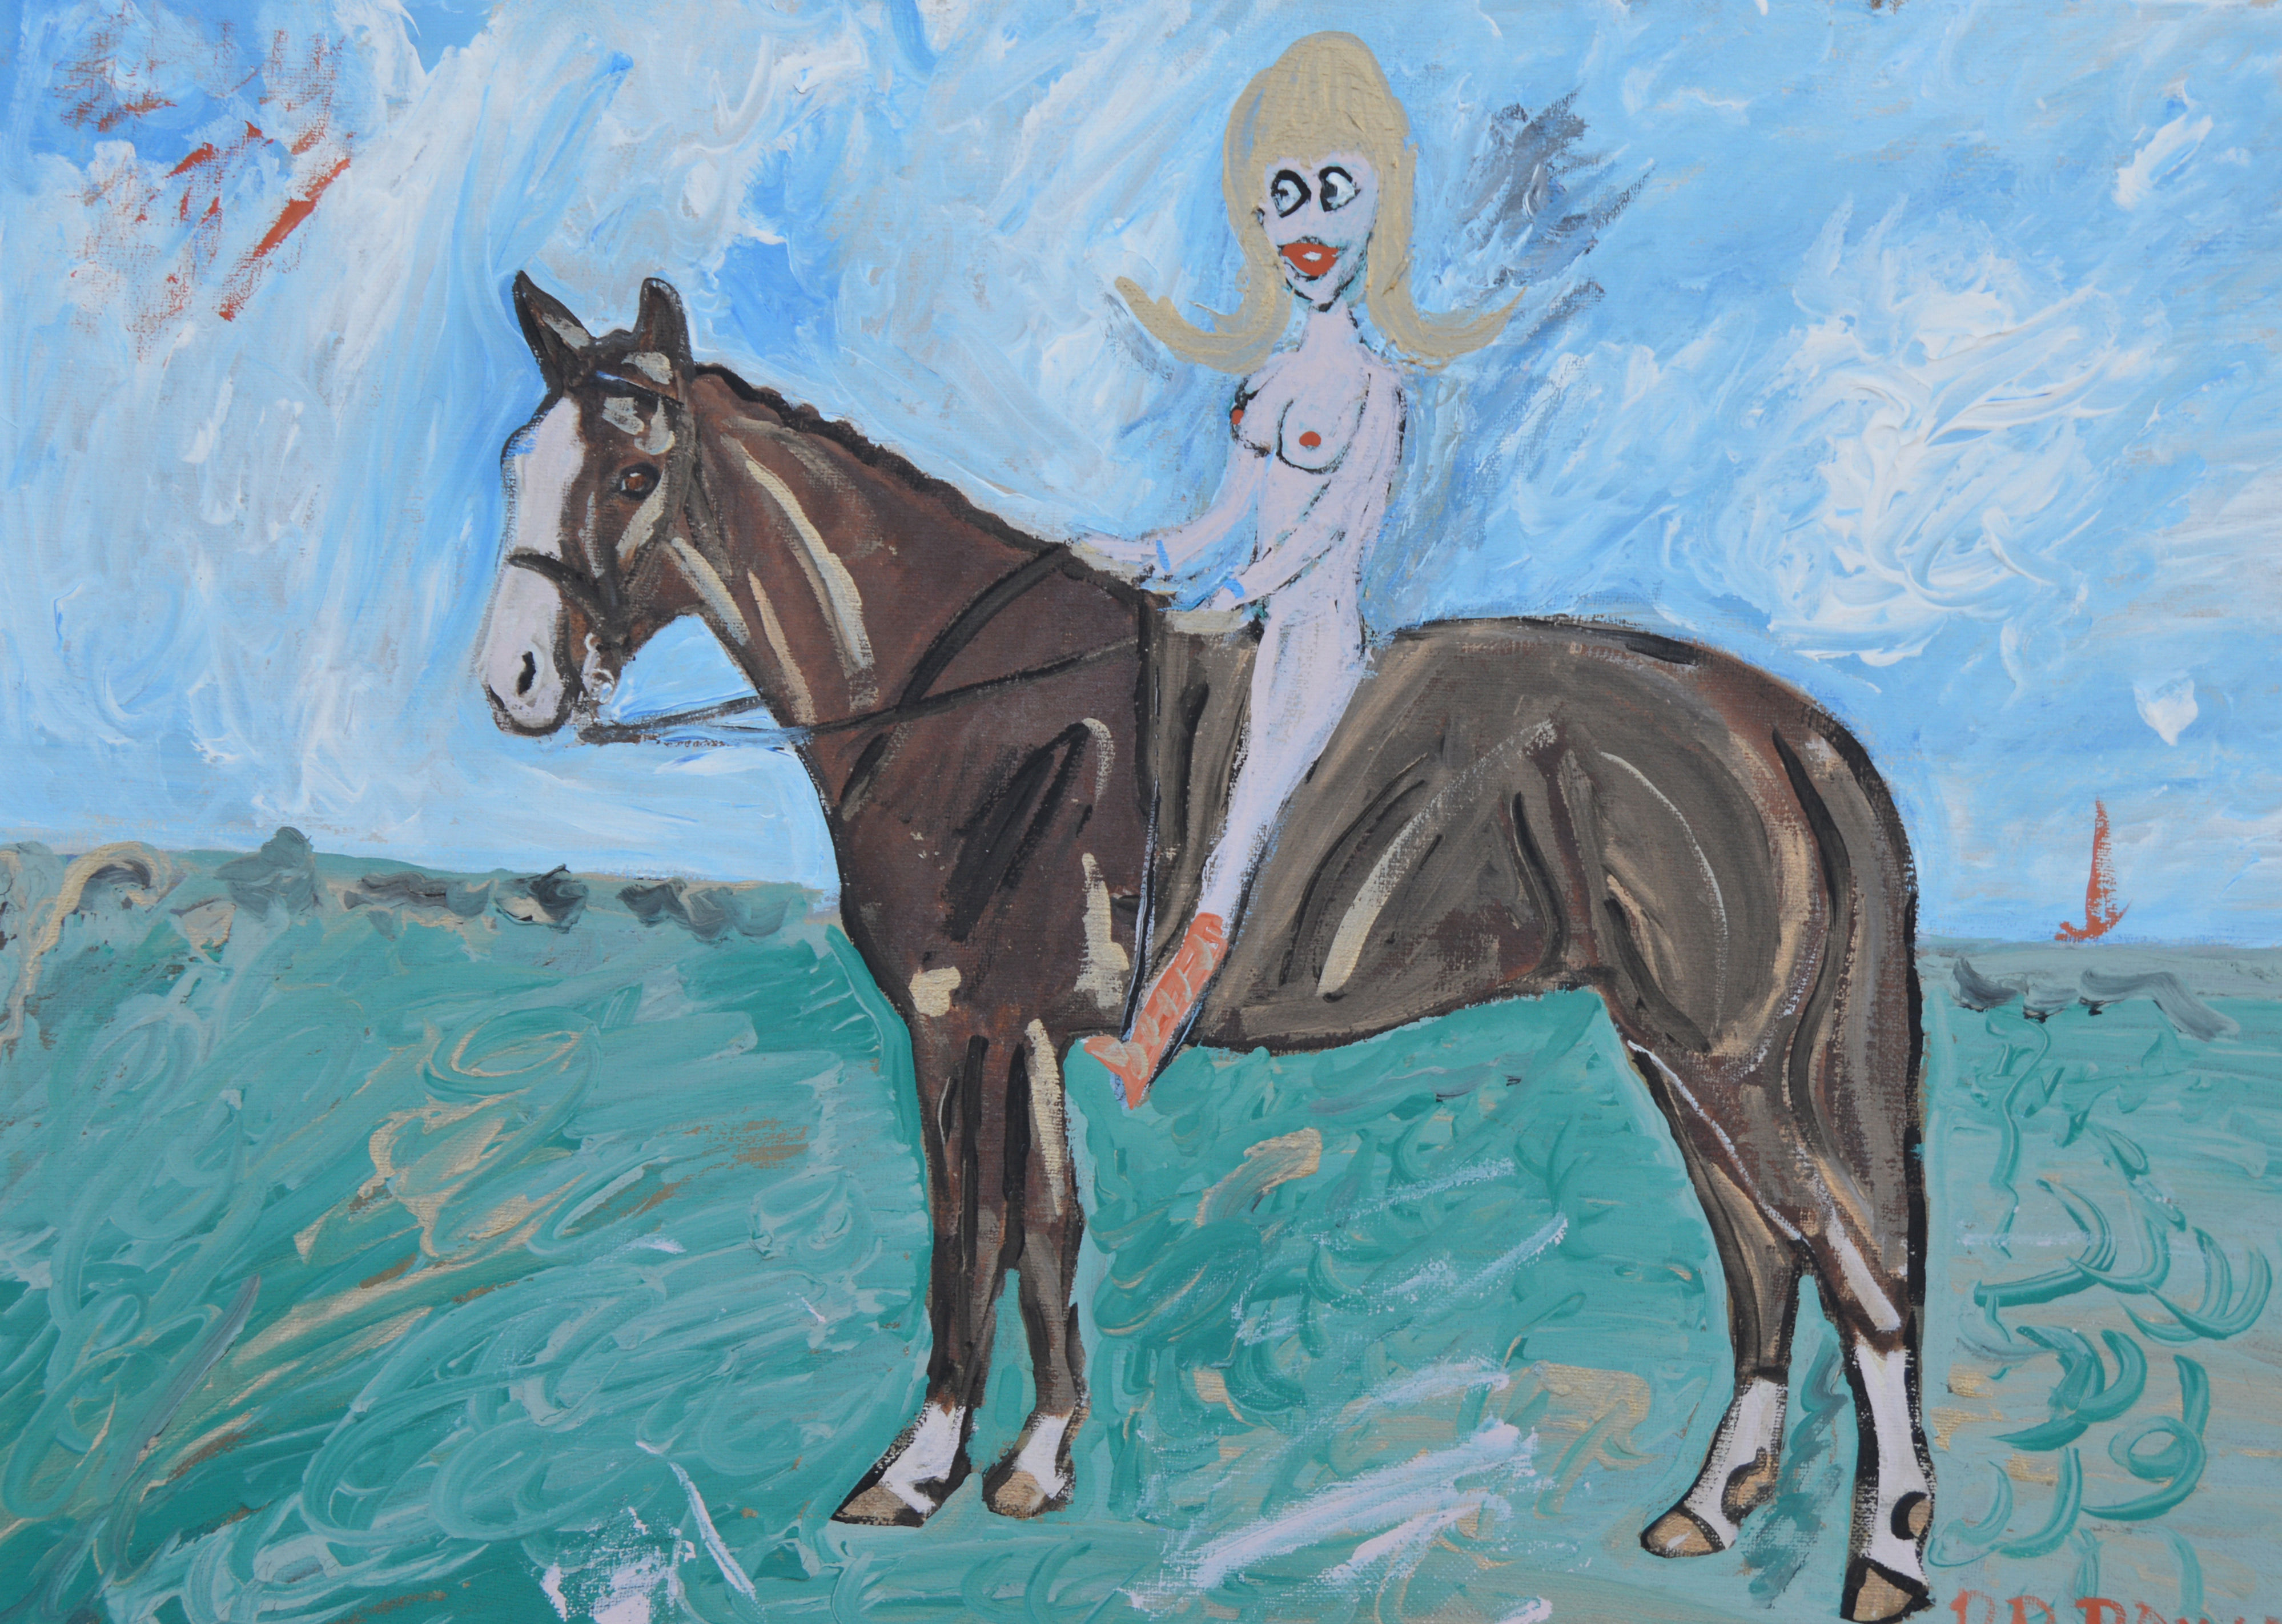 'Nude on a horse' Acrylic on canvas by BB Bango SOLD to IW Collector